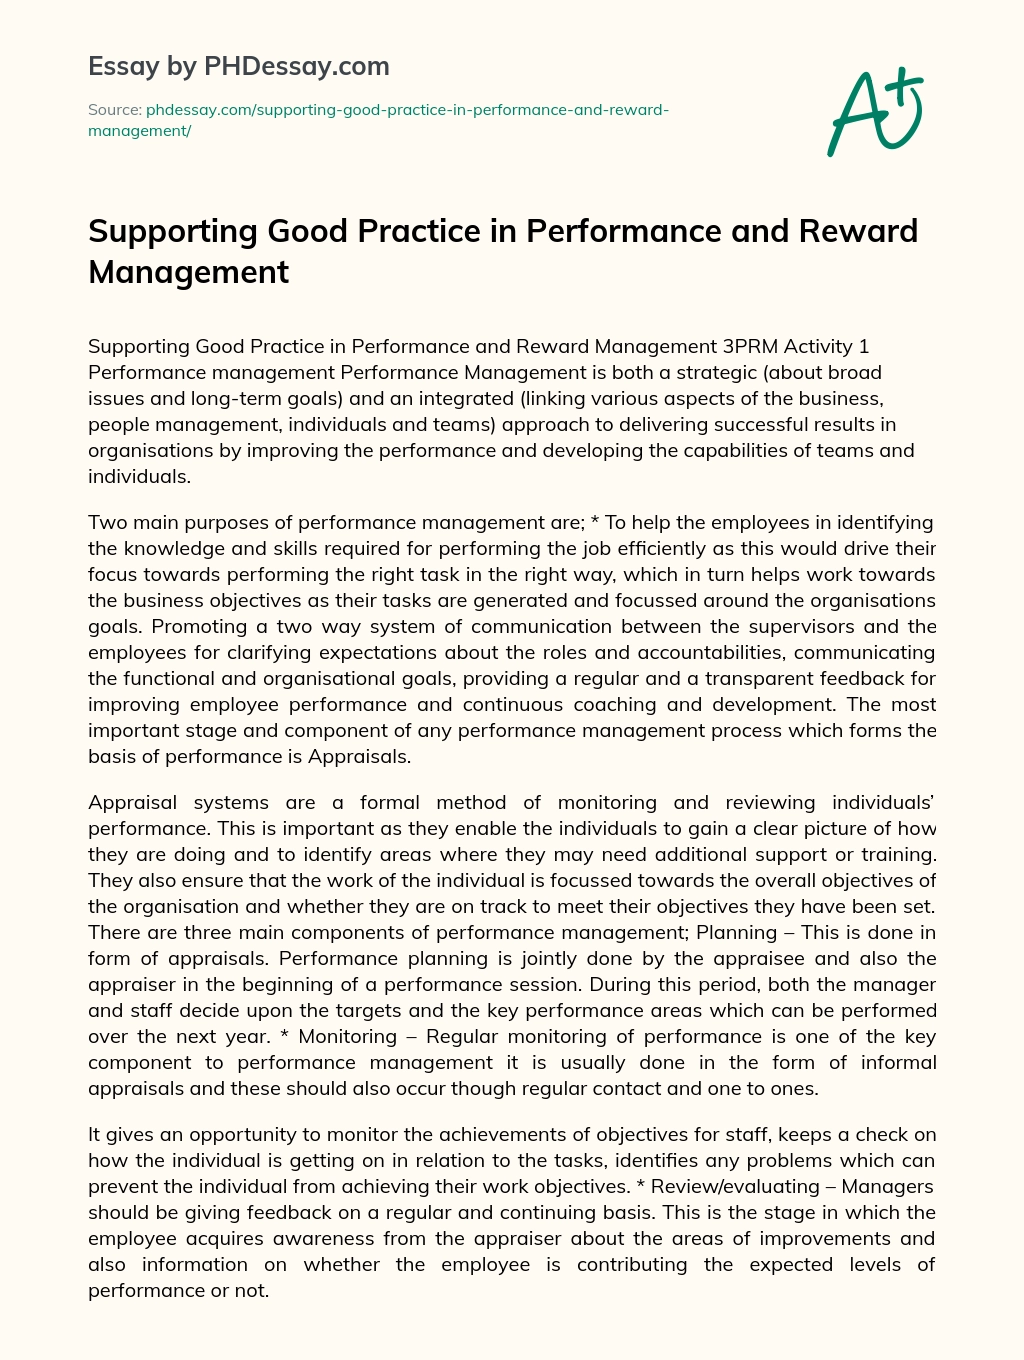 Supporting Good Practice in Performance and Reward Management essay